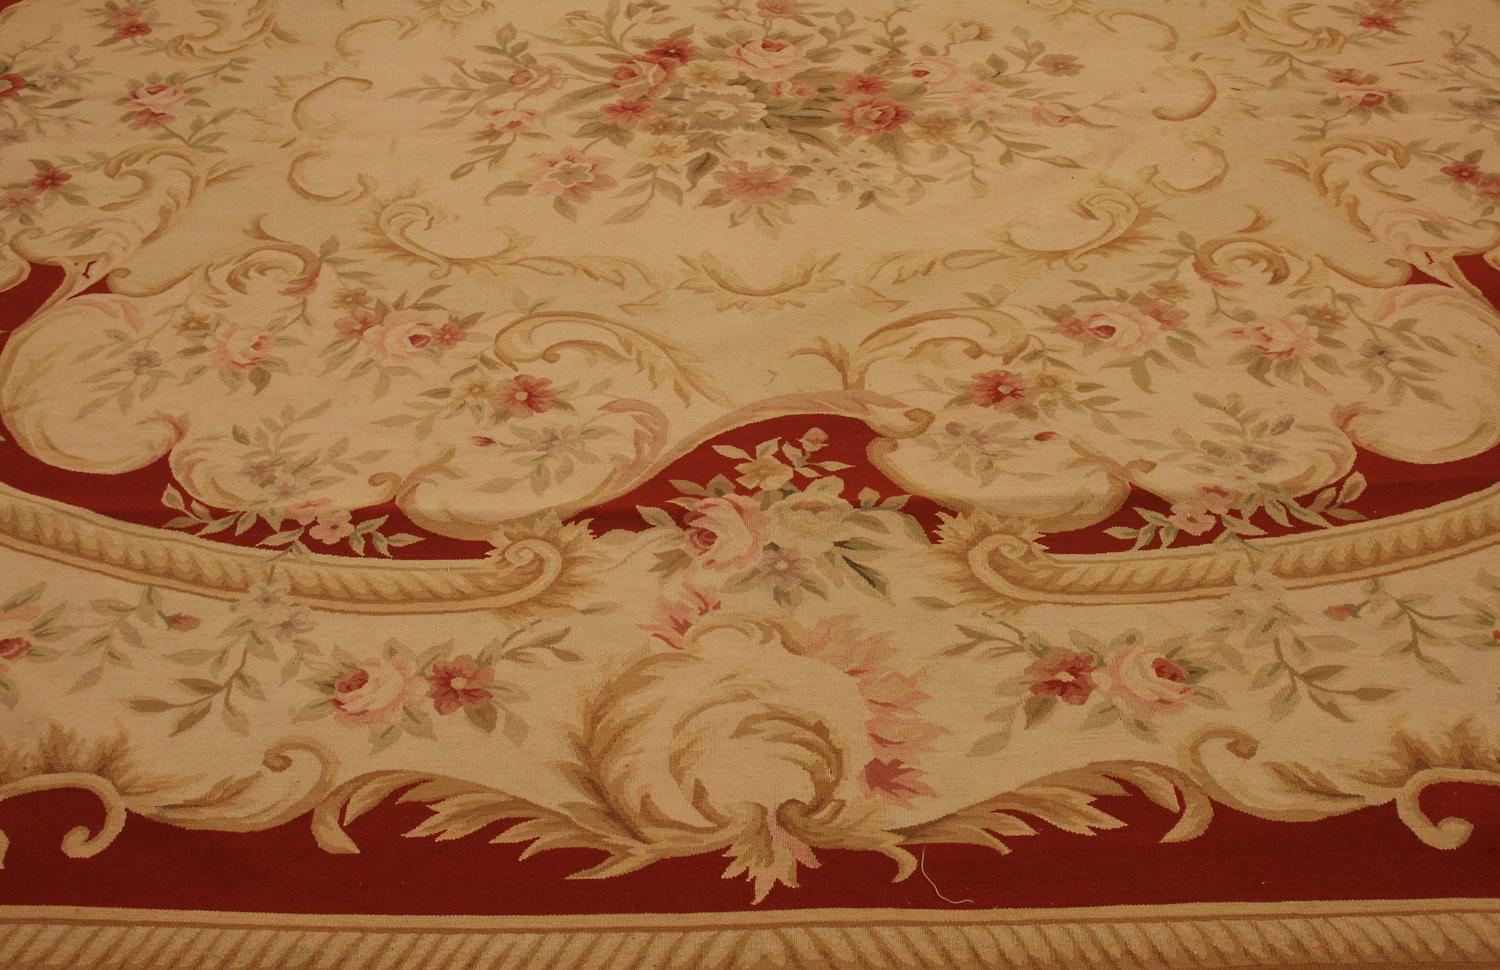 Wool Aubusson Rug Lockcloth Victorian Style Chinese,  21st Century